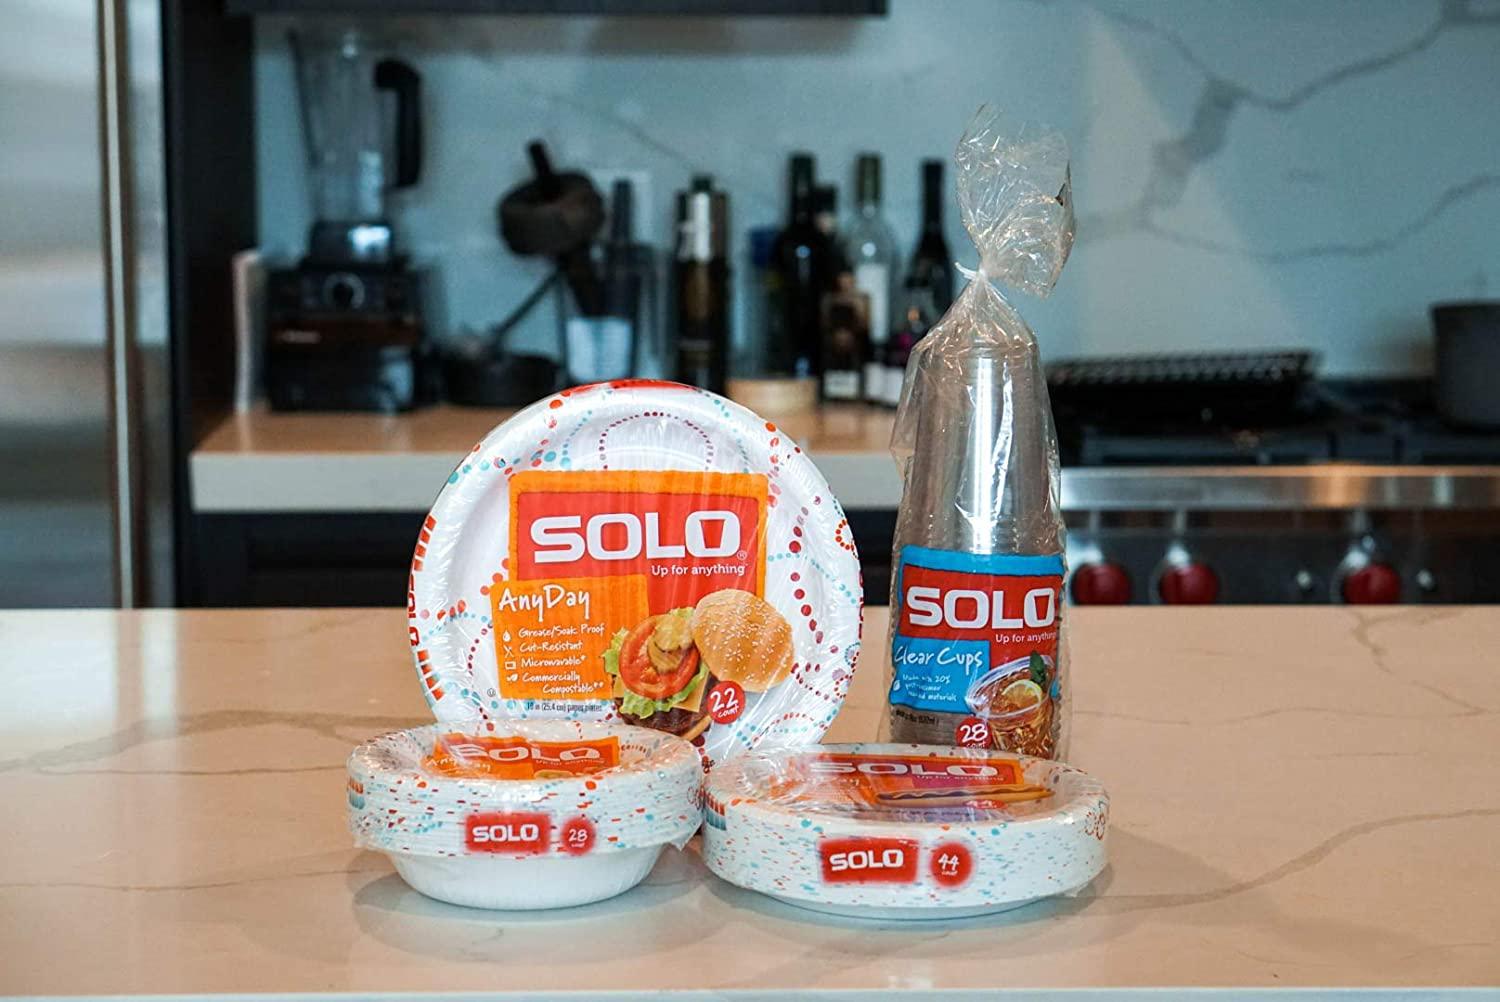 Solo® Anyday 8.5in Paper Plates, 90 ct - Food 4 Less